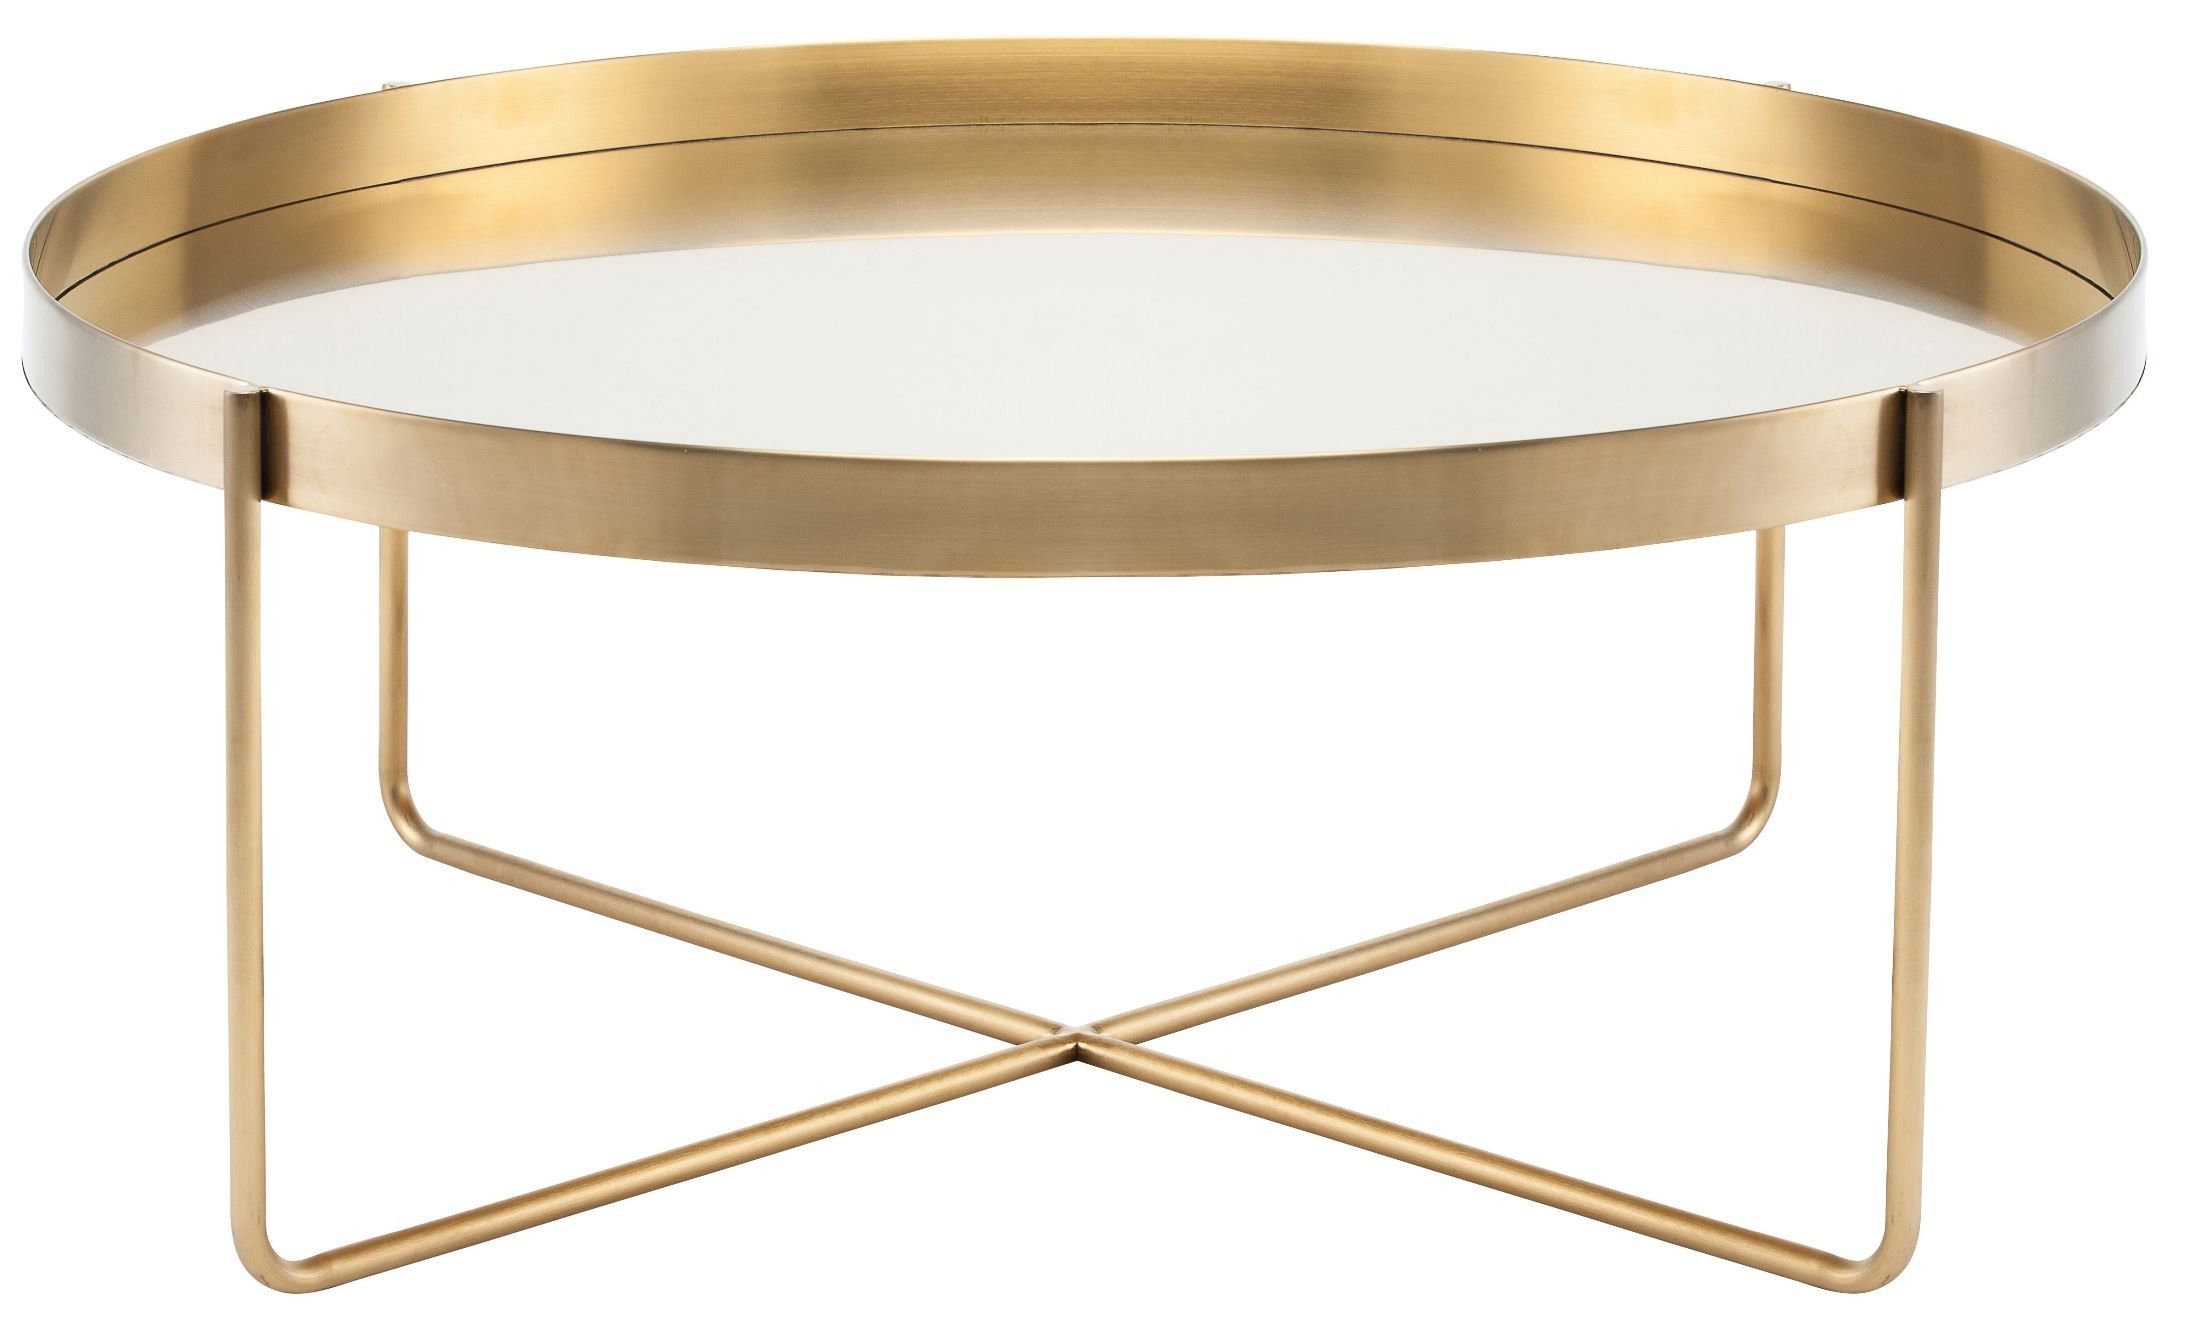 Gaultier 40" Gold Metal Coffee Table, Hgde122, Nuevo Intended For Antique Gold Aluminum Coffee Tables (View 4 of 15)